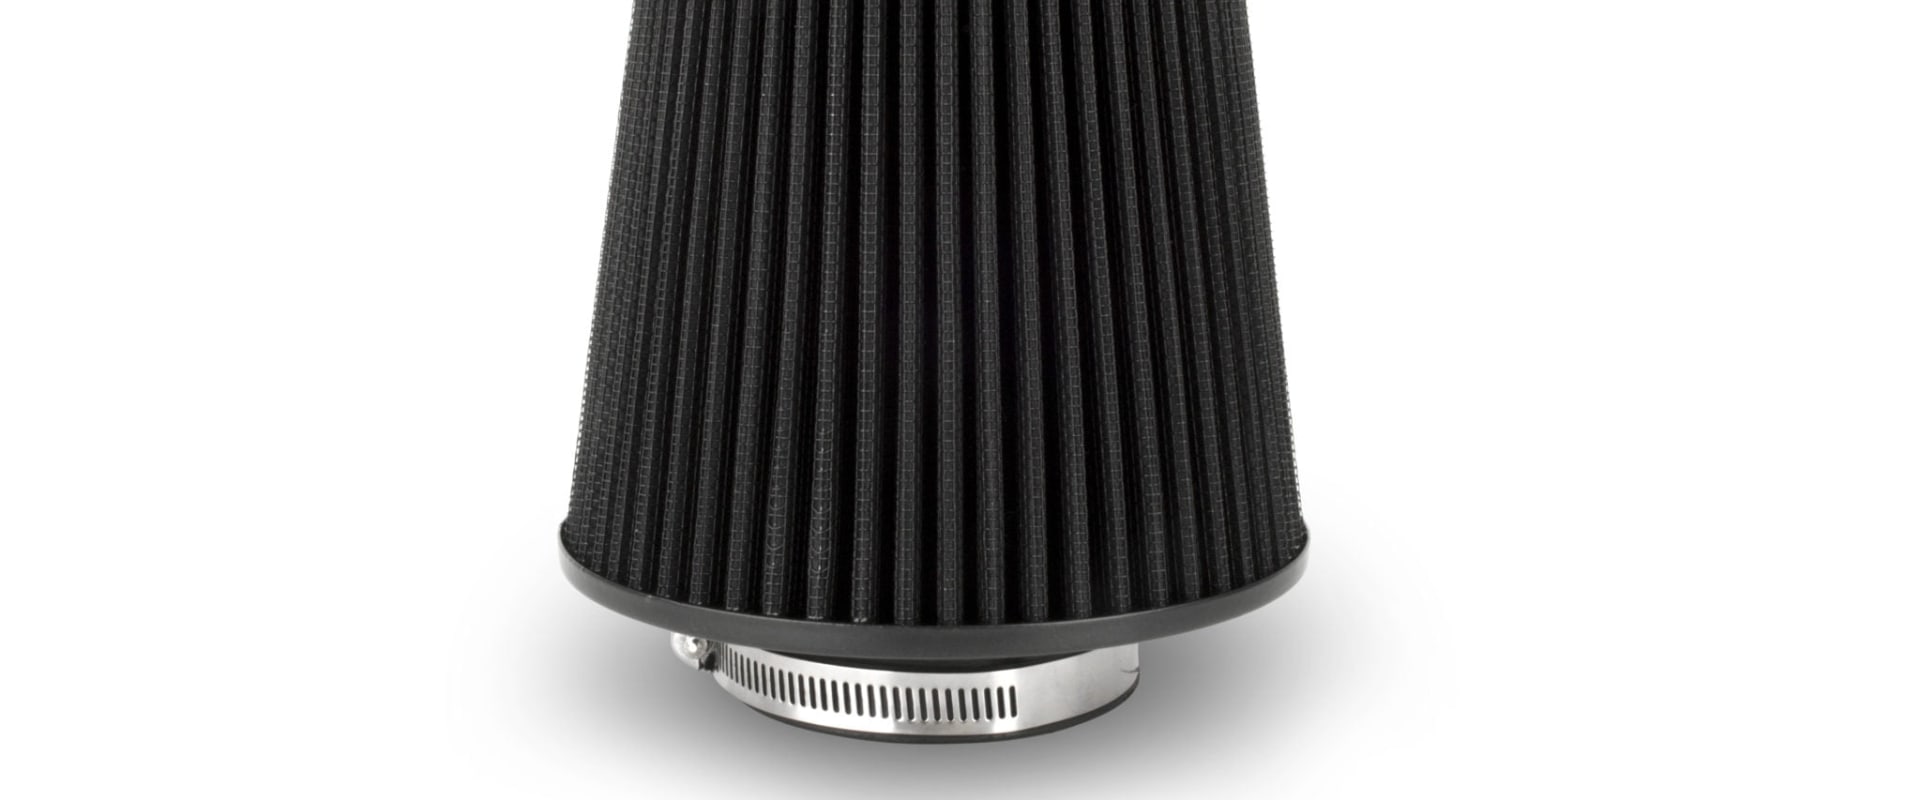 Do I Need to Use a 4-Inch Air Filter? - An Expert's Perspective